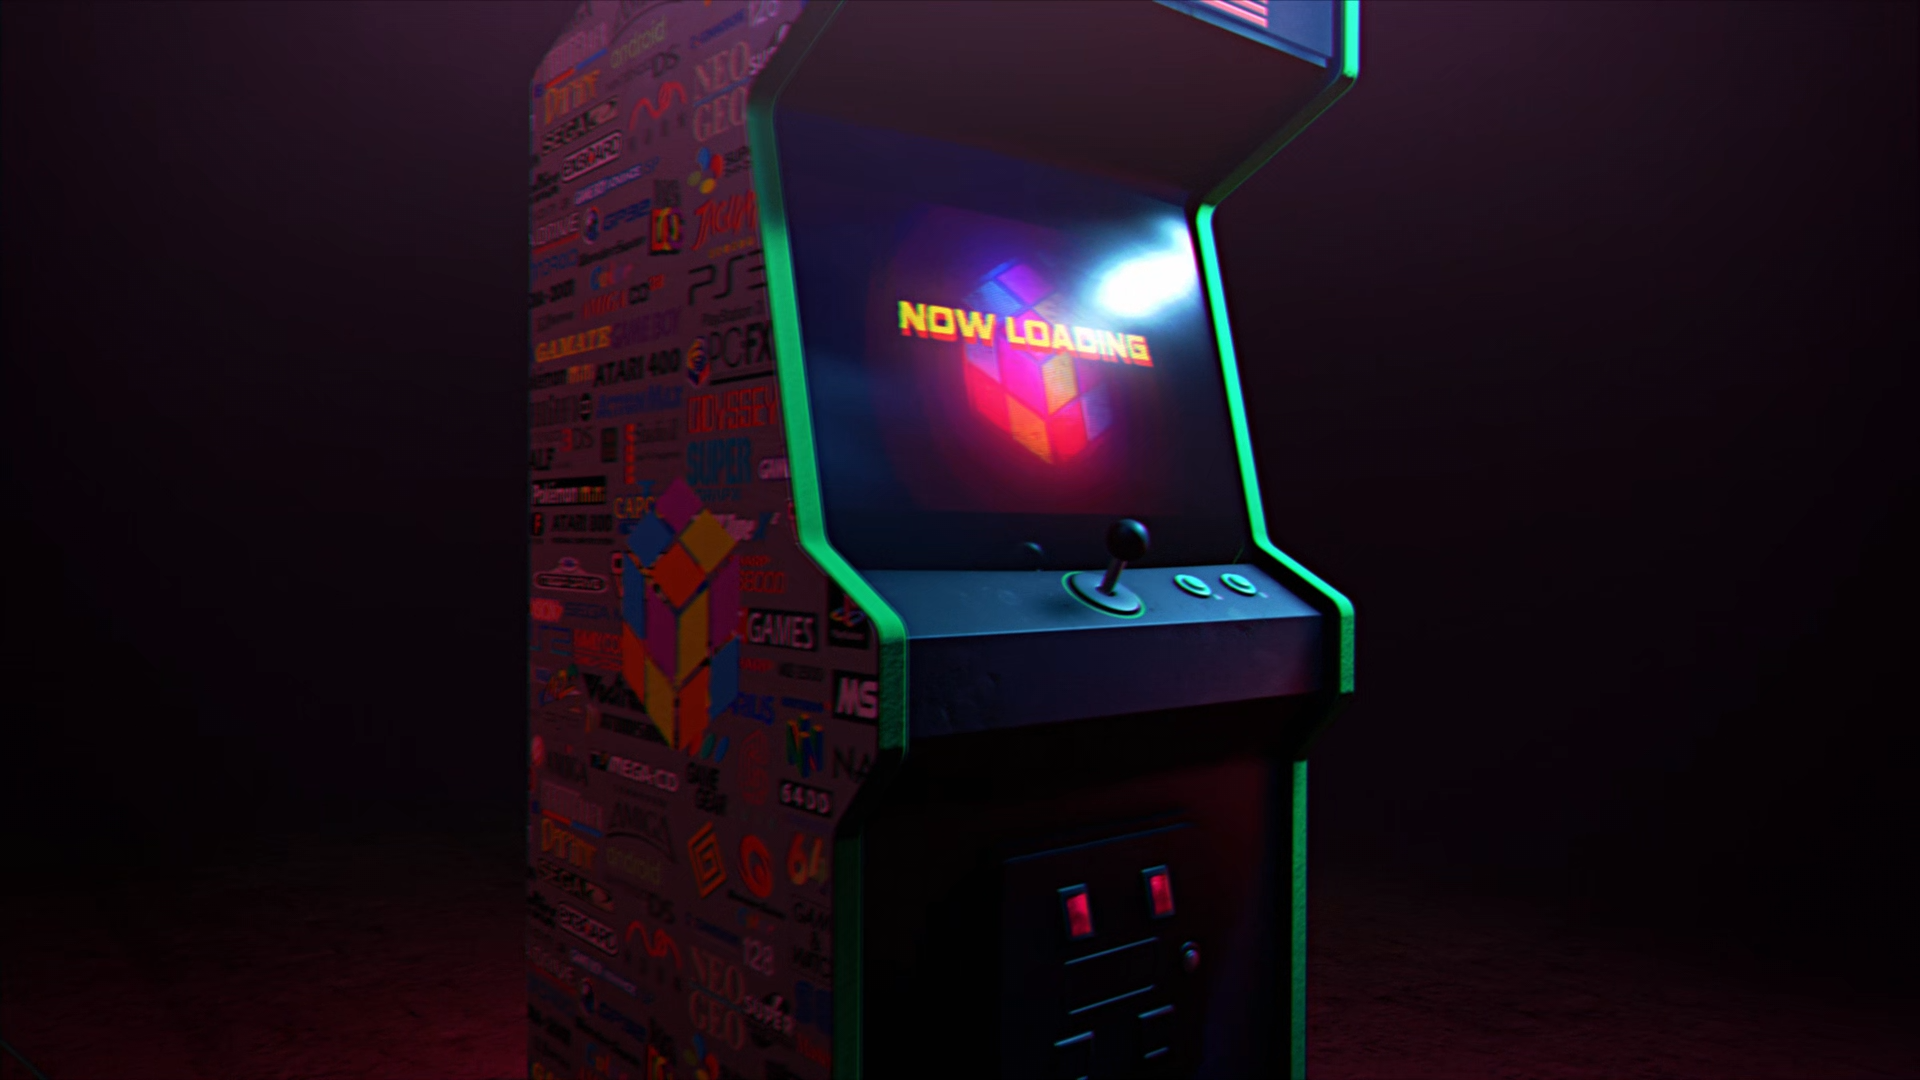 More information about "Arcade Cab Startup"